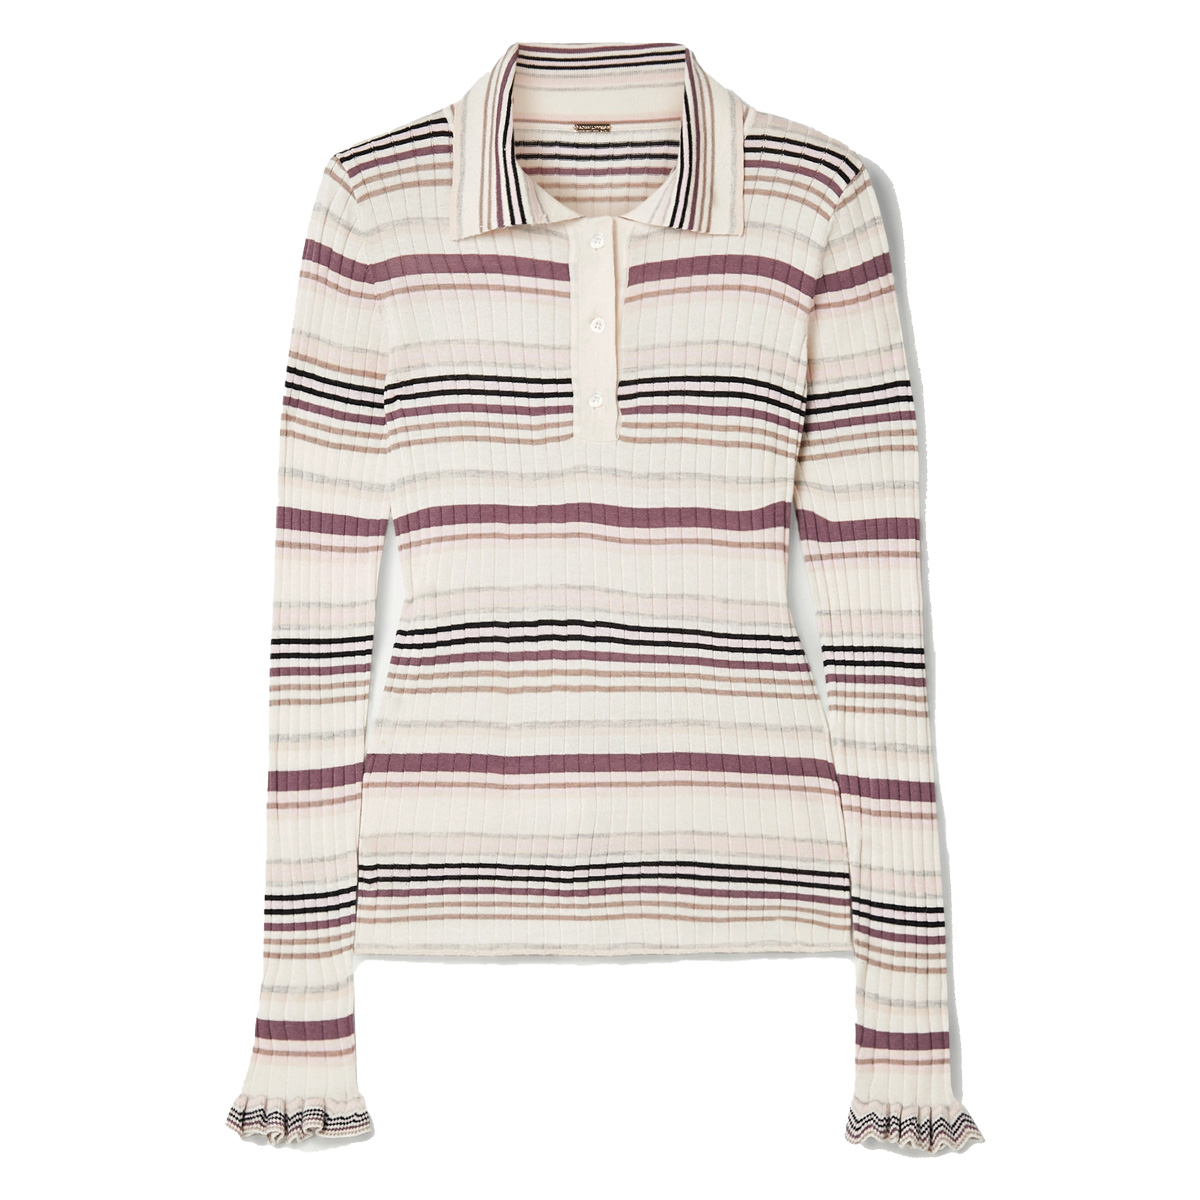 Shop the 18 Knit Polo Shirts We're Buying Fall - Coveteur: Inside 